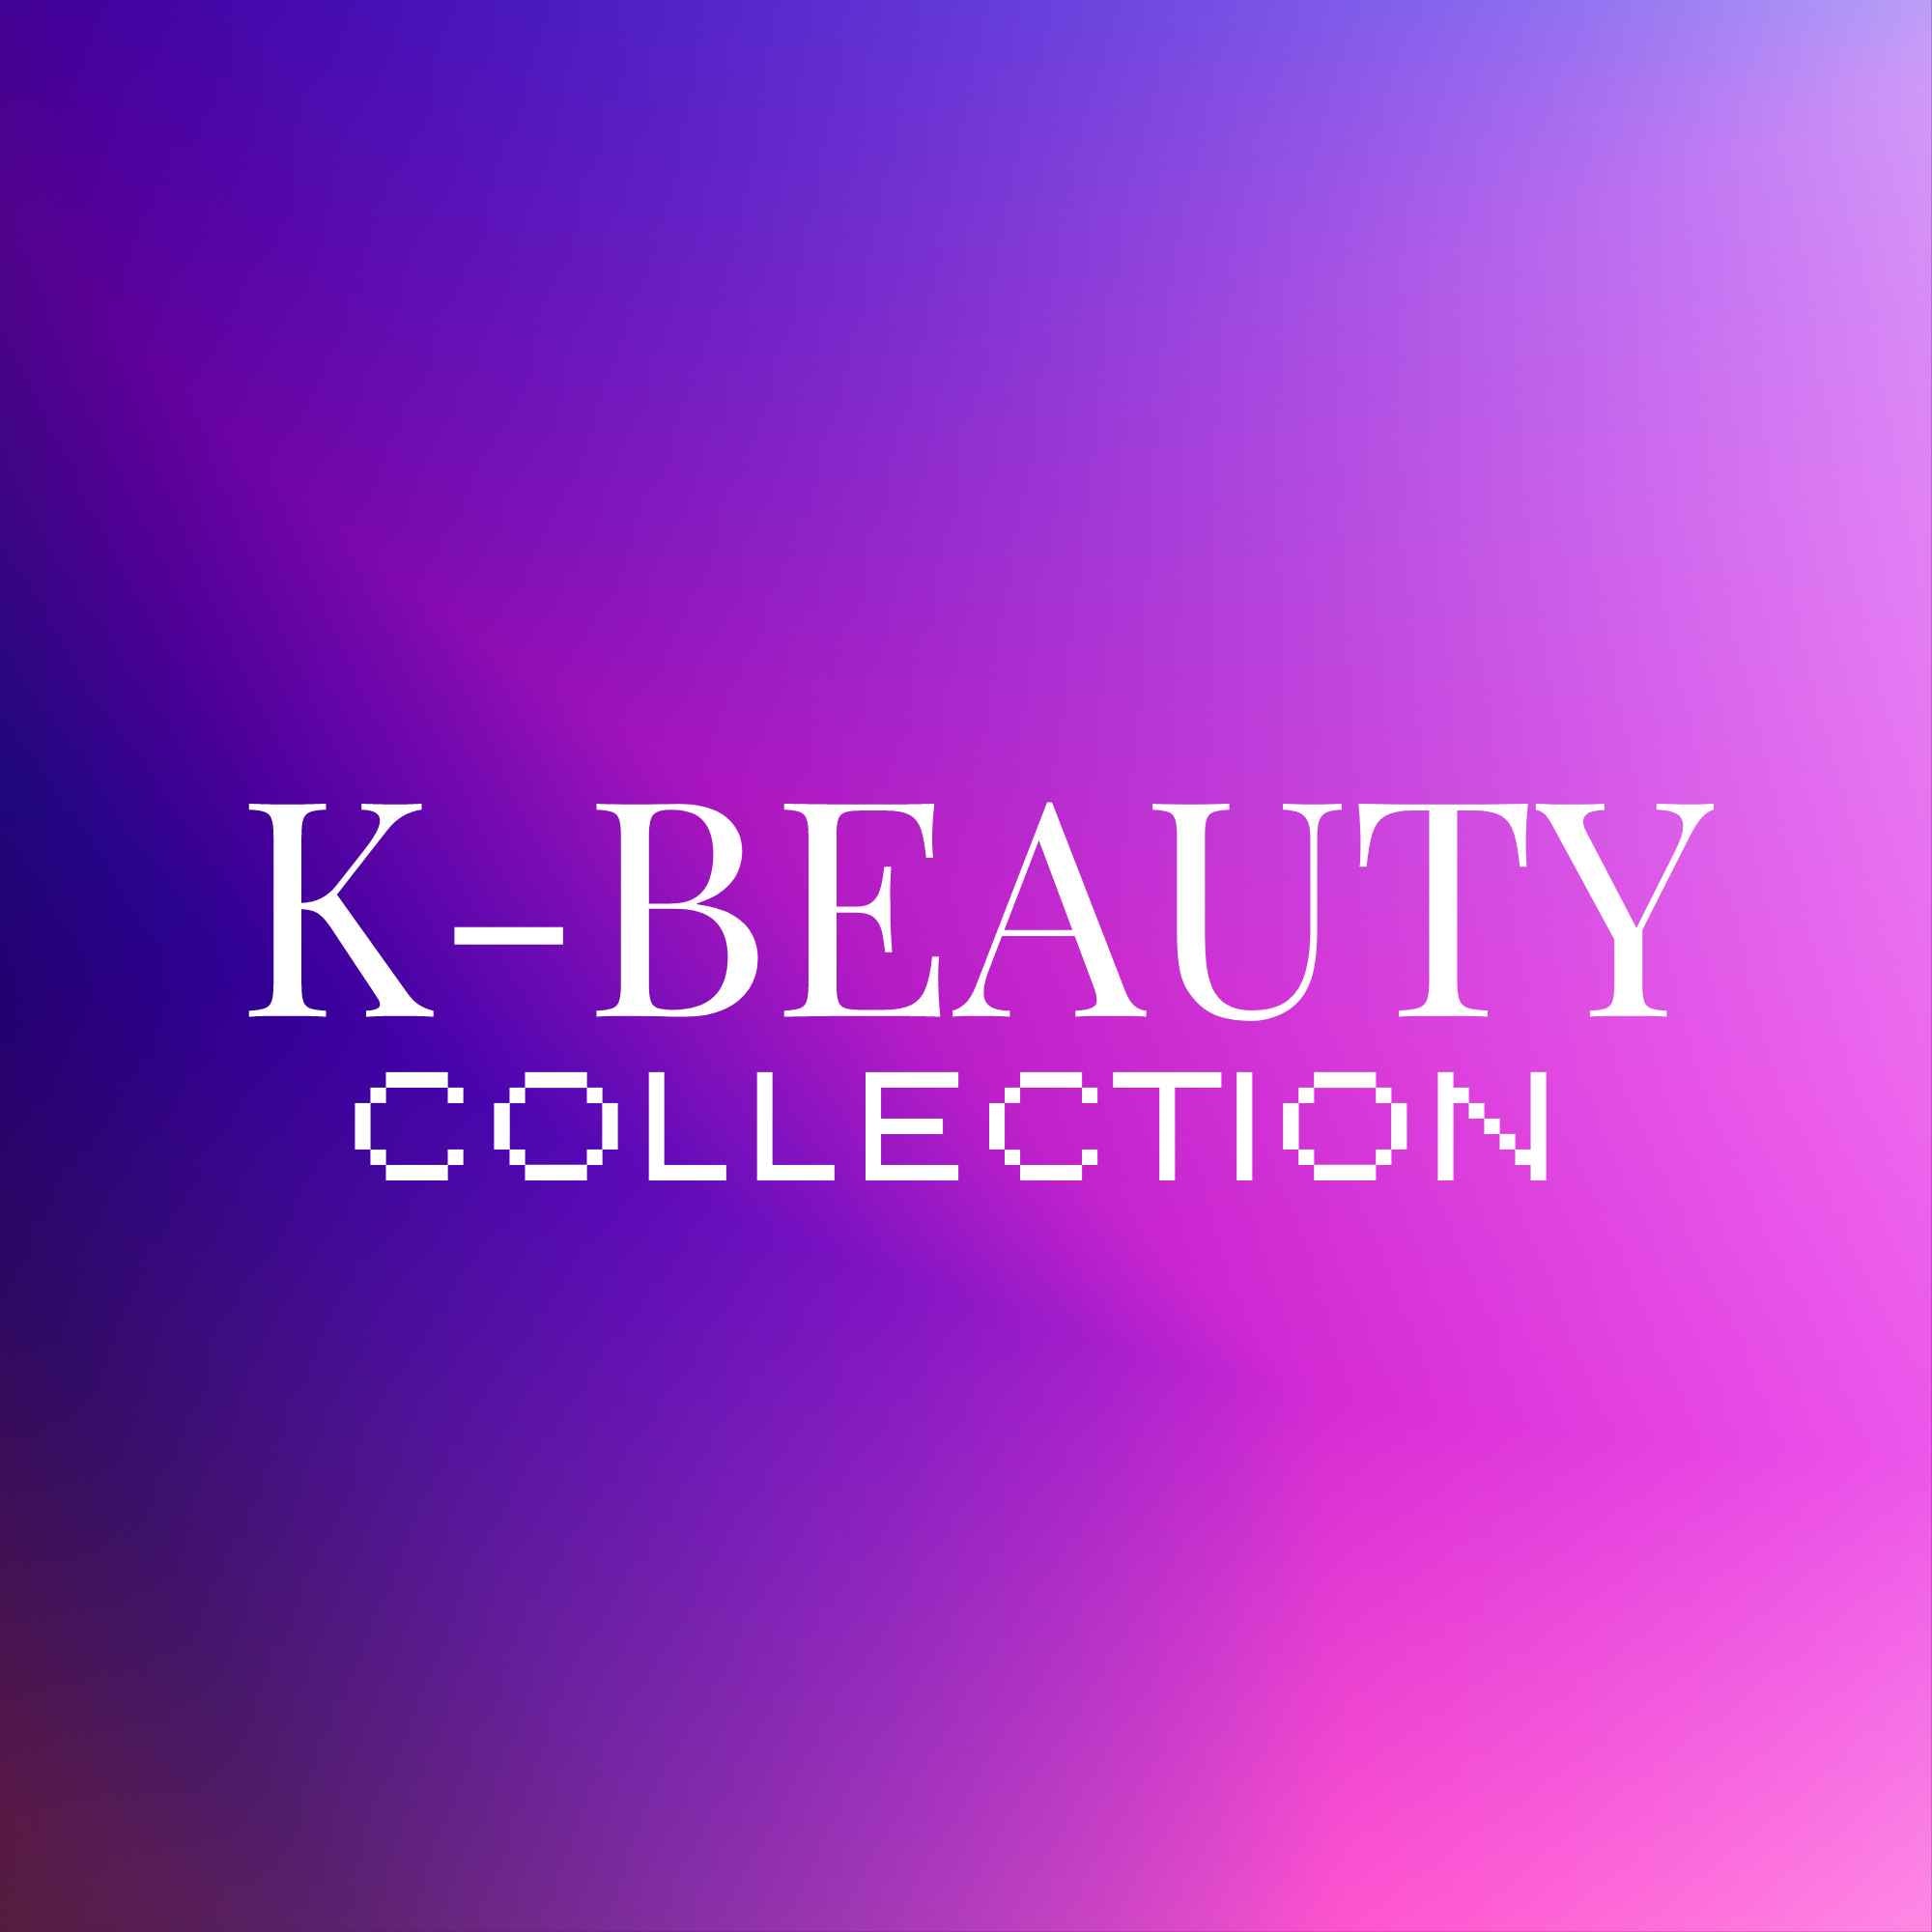 An Image Icon showing K-beauty collection text